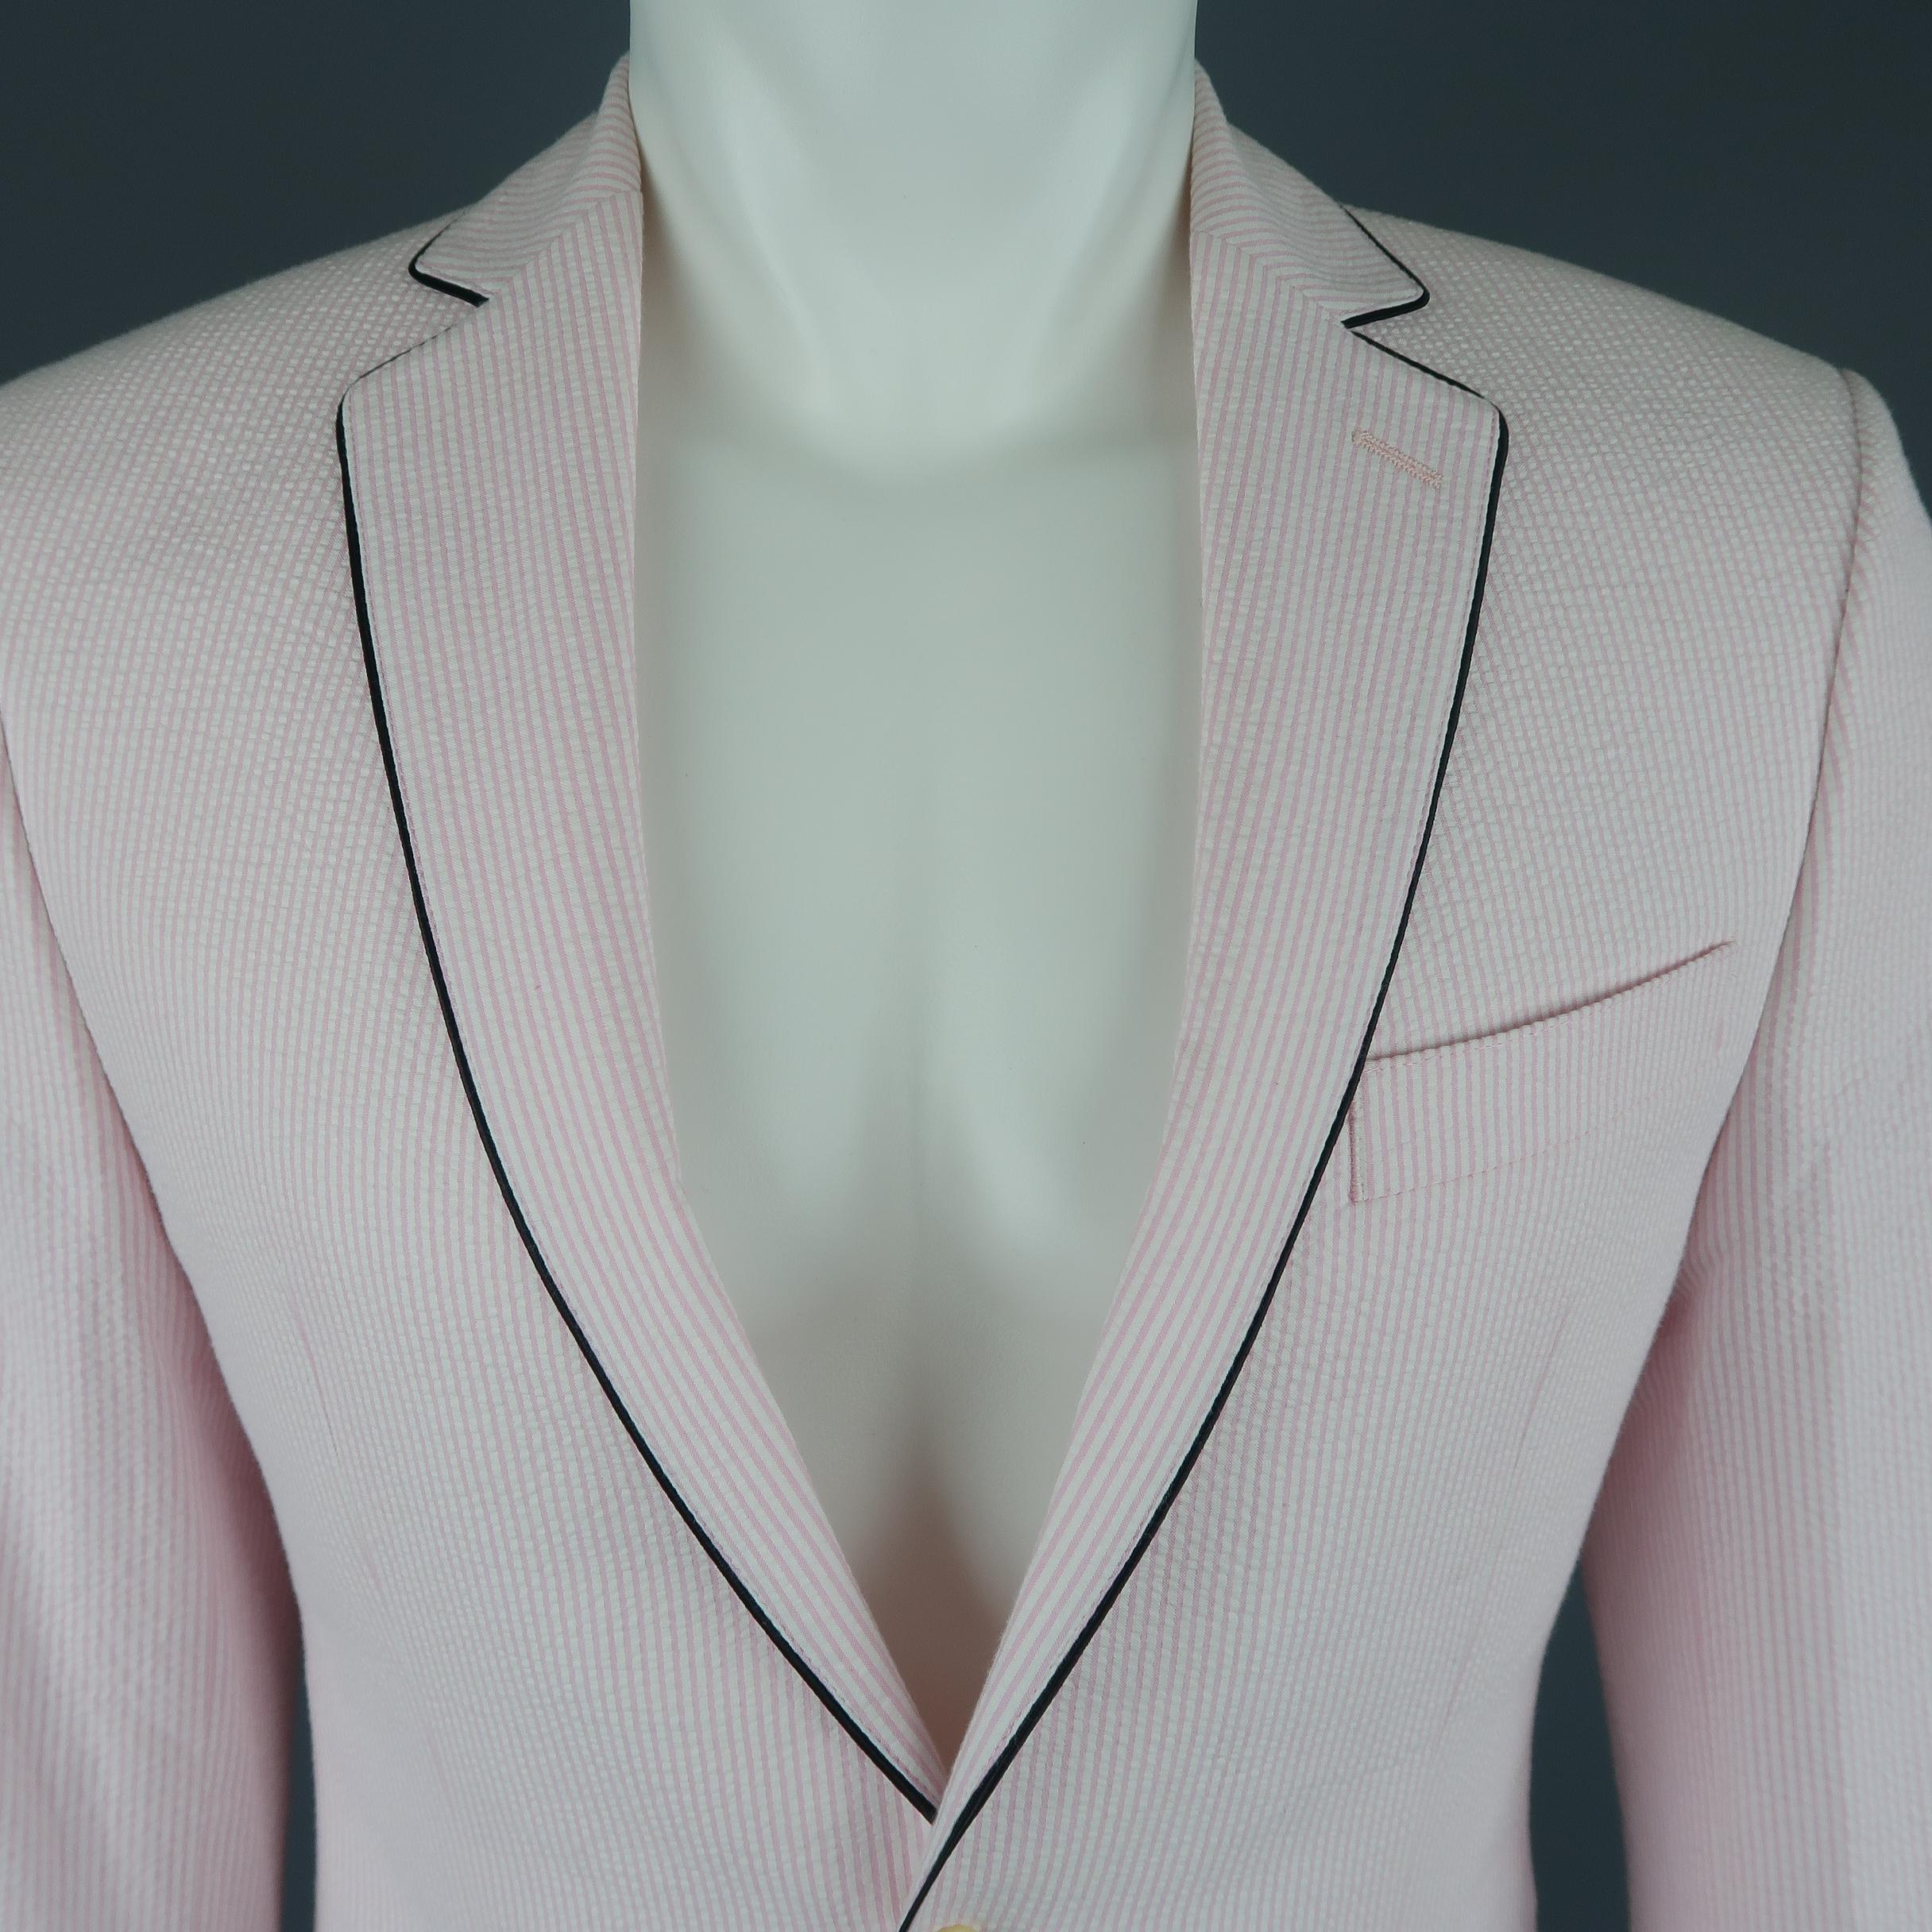 Single breasted TALLIA sport coat jacket come sin pink striped seersucker with a two button front, black piping, and notch lapel.
 
New with Tags.
Marked: 36 R
 
Measurements:
 
Shoulder: 17 in.
Chest: 40 in.
Sleeve: 24 in.
Length: 29 in.